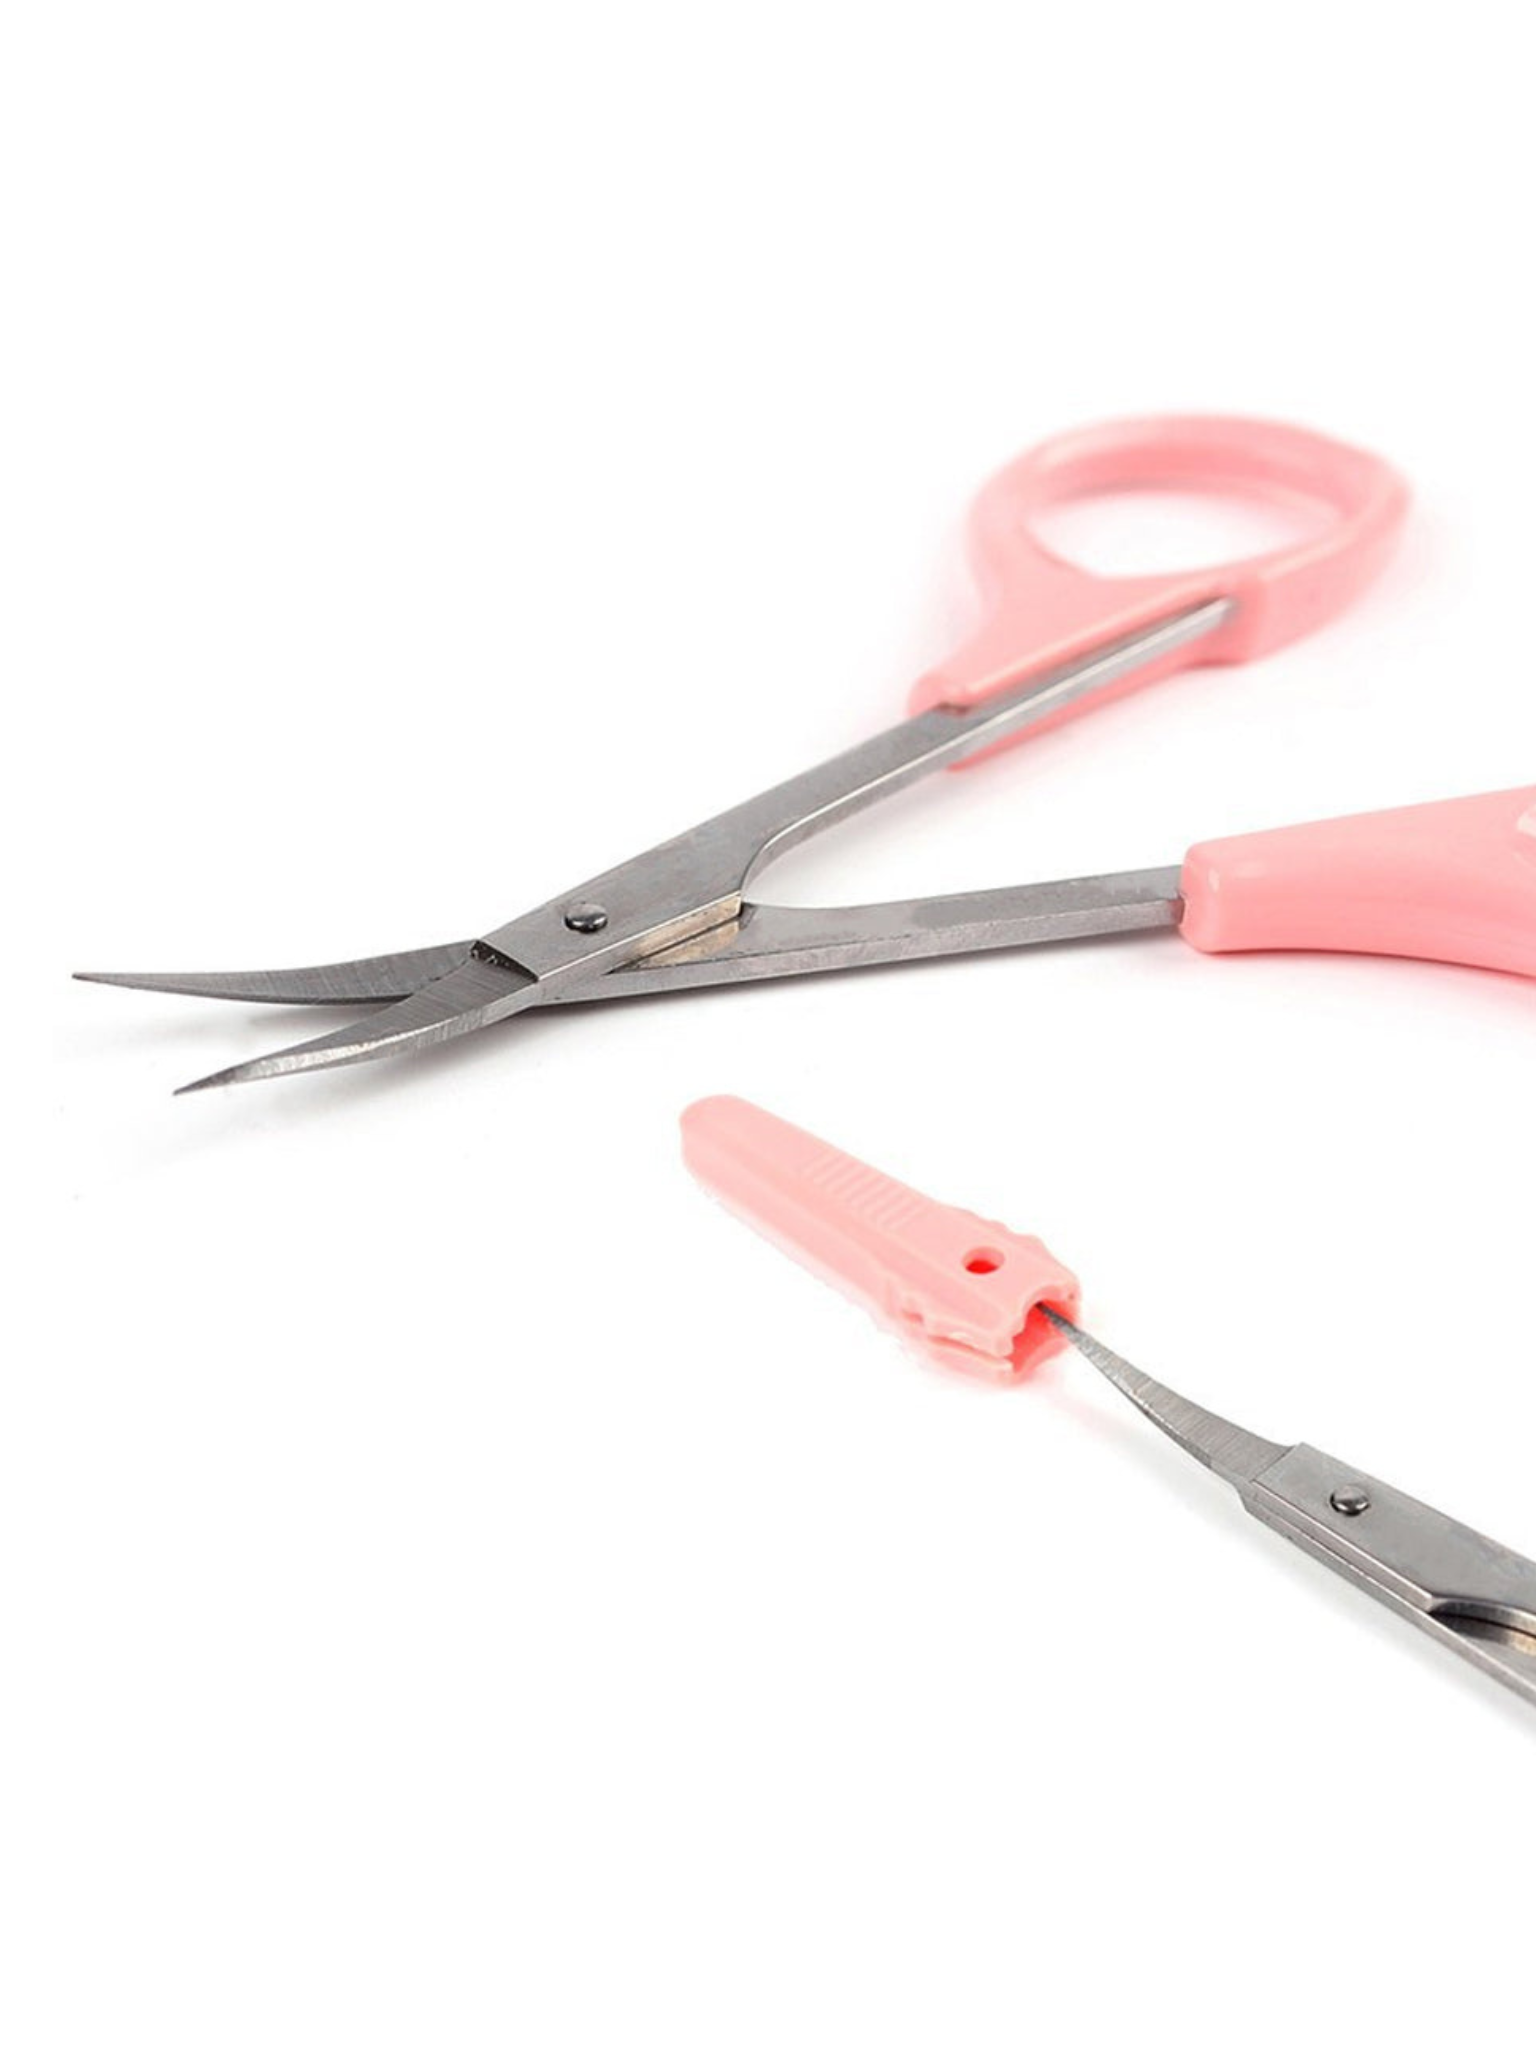 Sassy+Chic Trimming and Shaping Eyebrow Pink Scissors